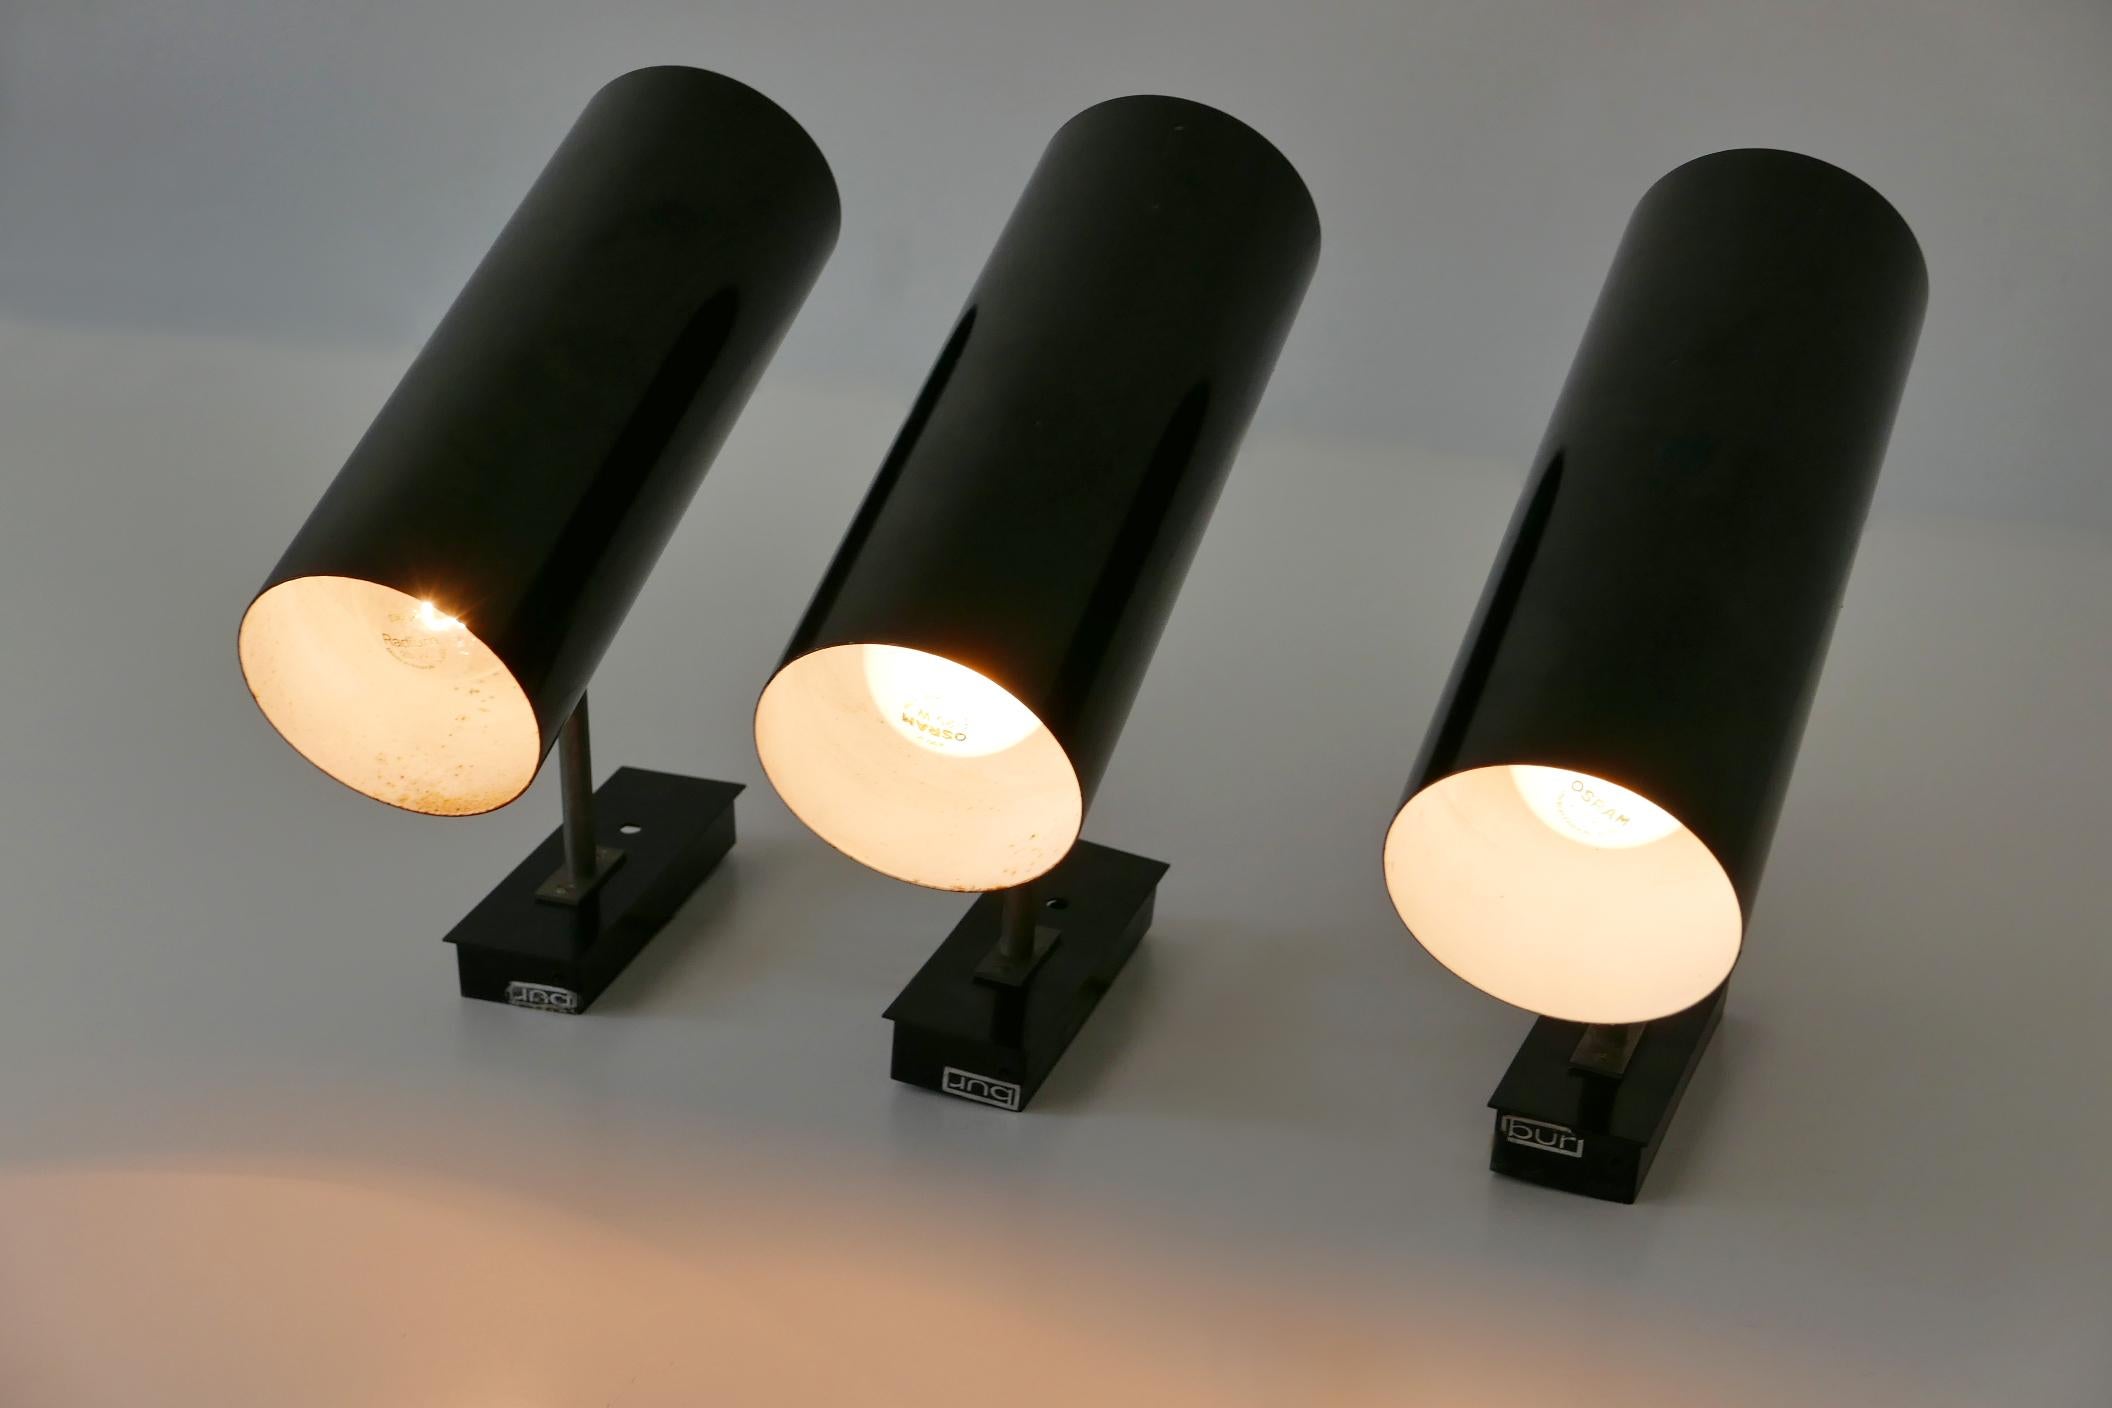 Set of three rare and elegant Mid-Century Modern sconces or wall lamps with adjustable shades. Manufactured by Bünte & Remmler (BuR), Germany, 1950s. Makers label to the base of each sconces (BUR).

Executed in outside black, inside white enameled